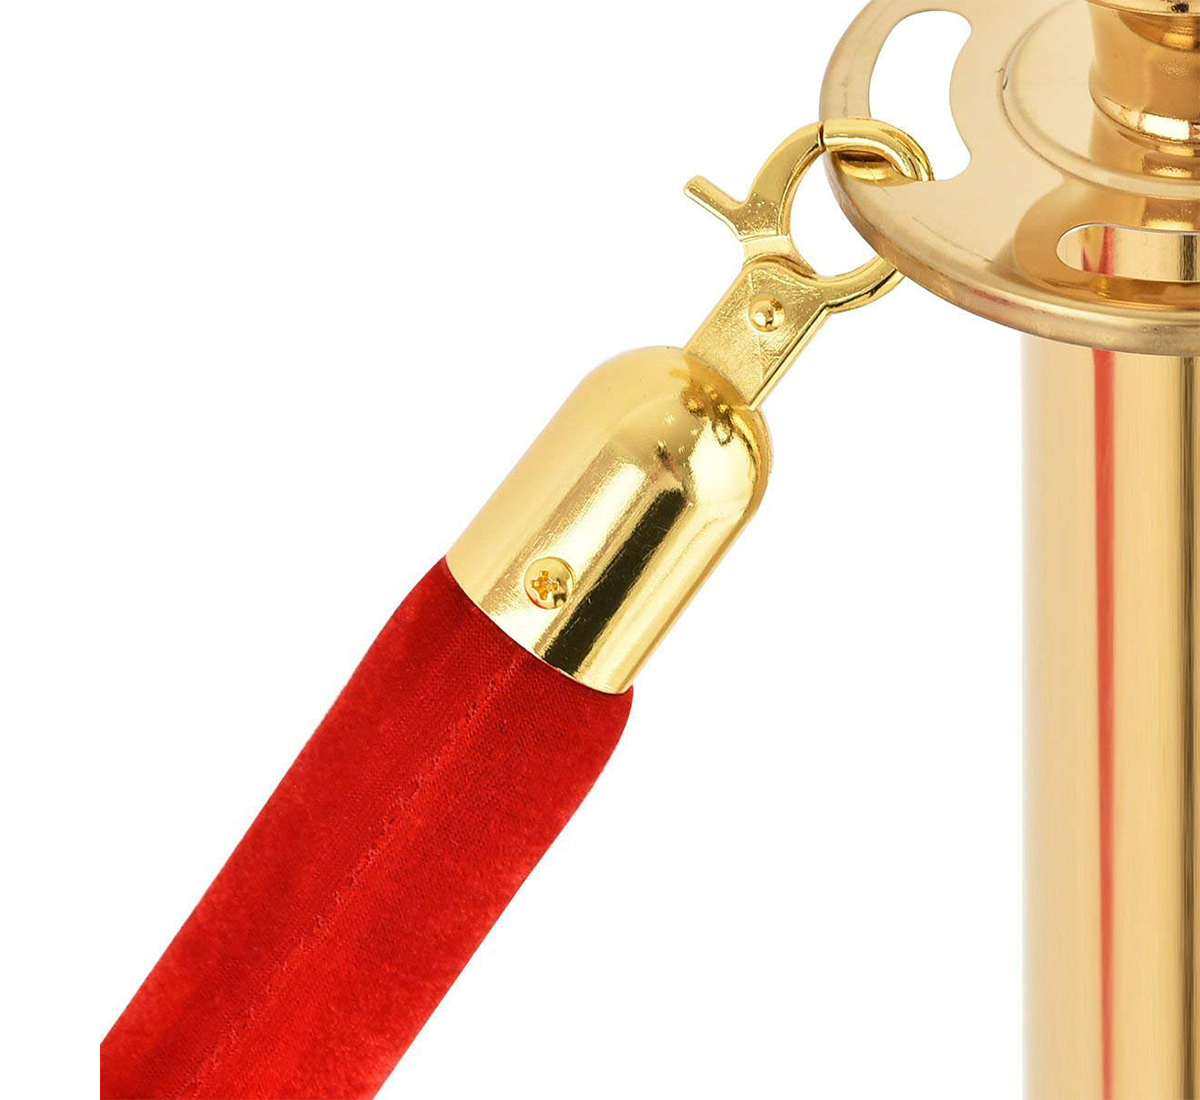 Red velvet queue manager rope with golden hooks